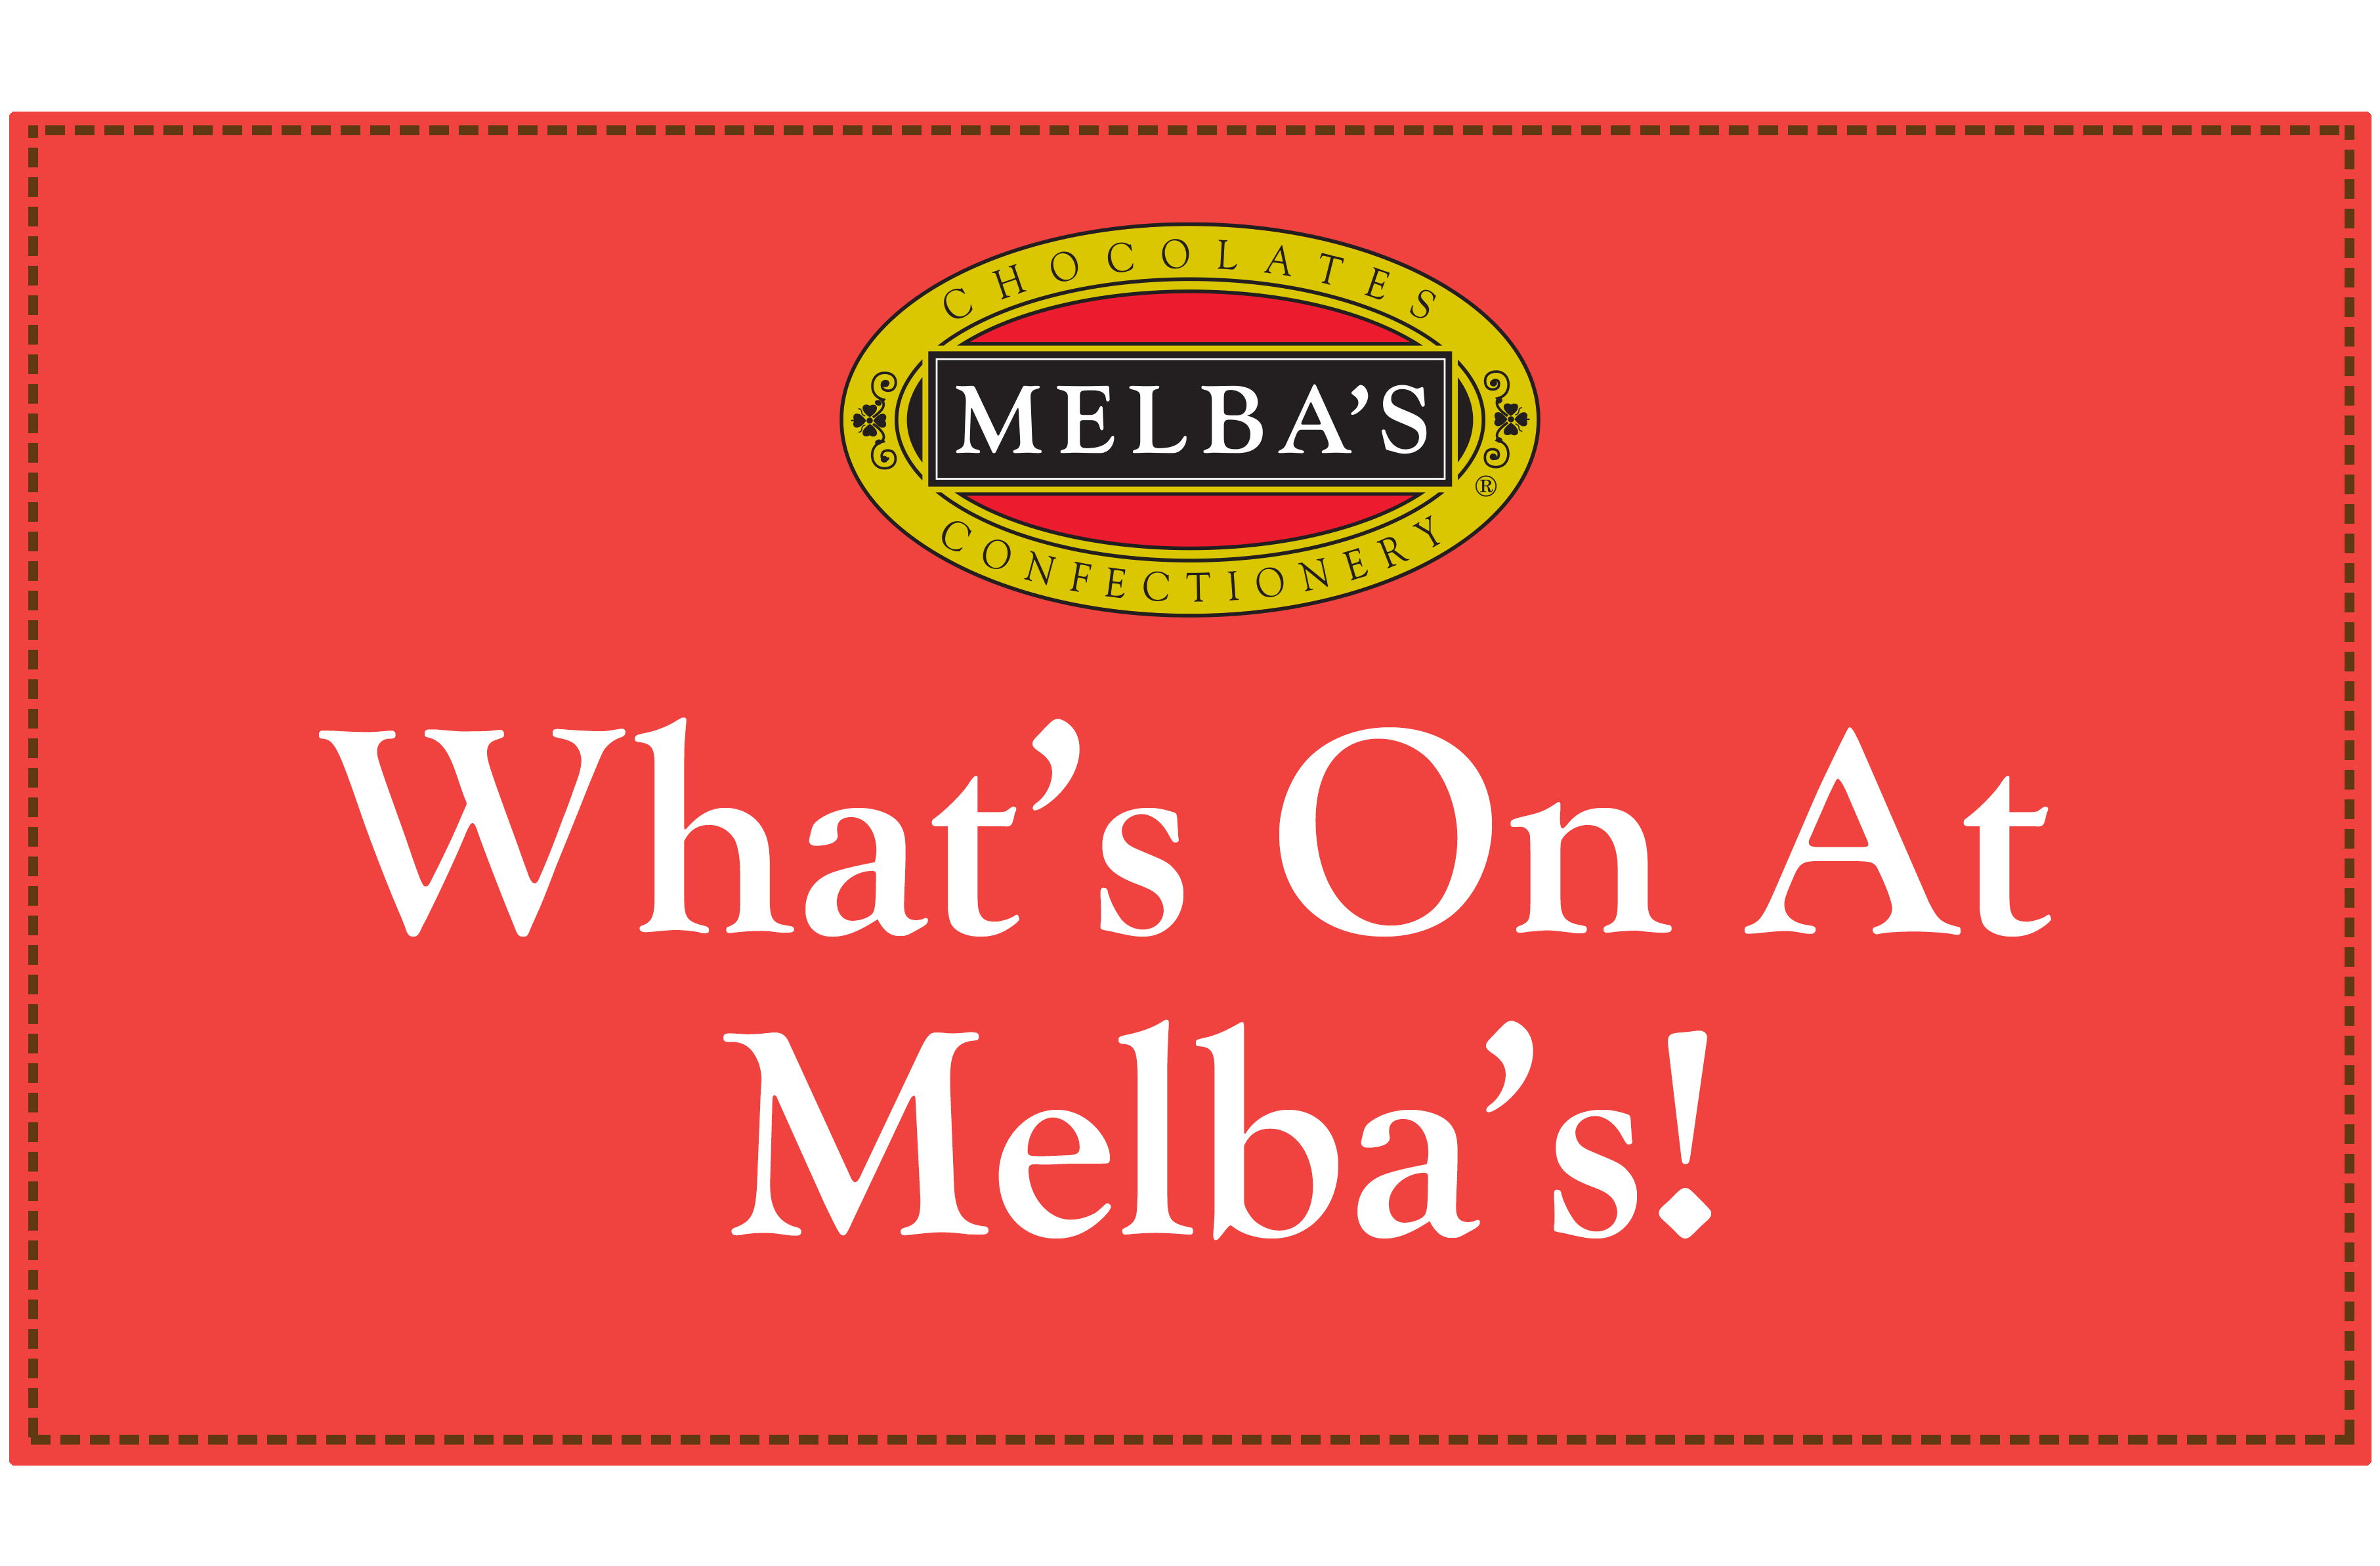 What's on at Melba's